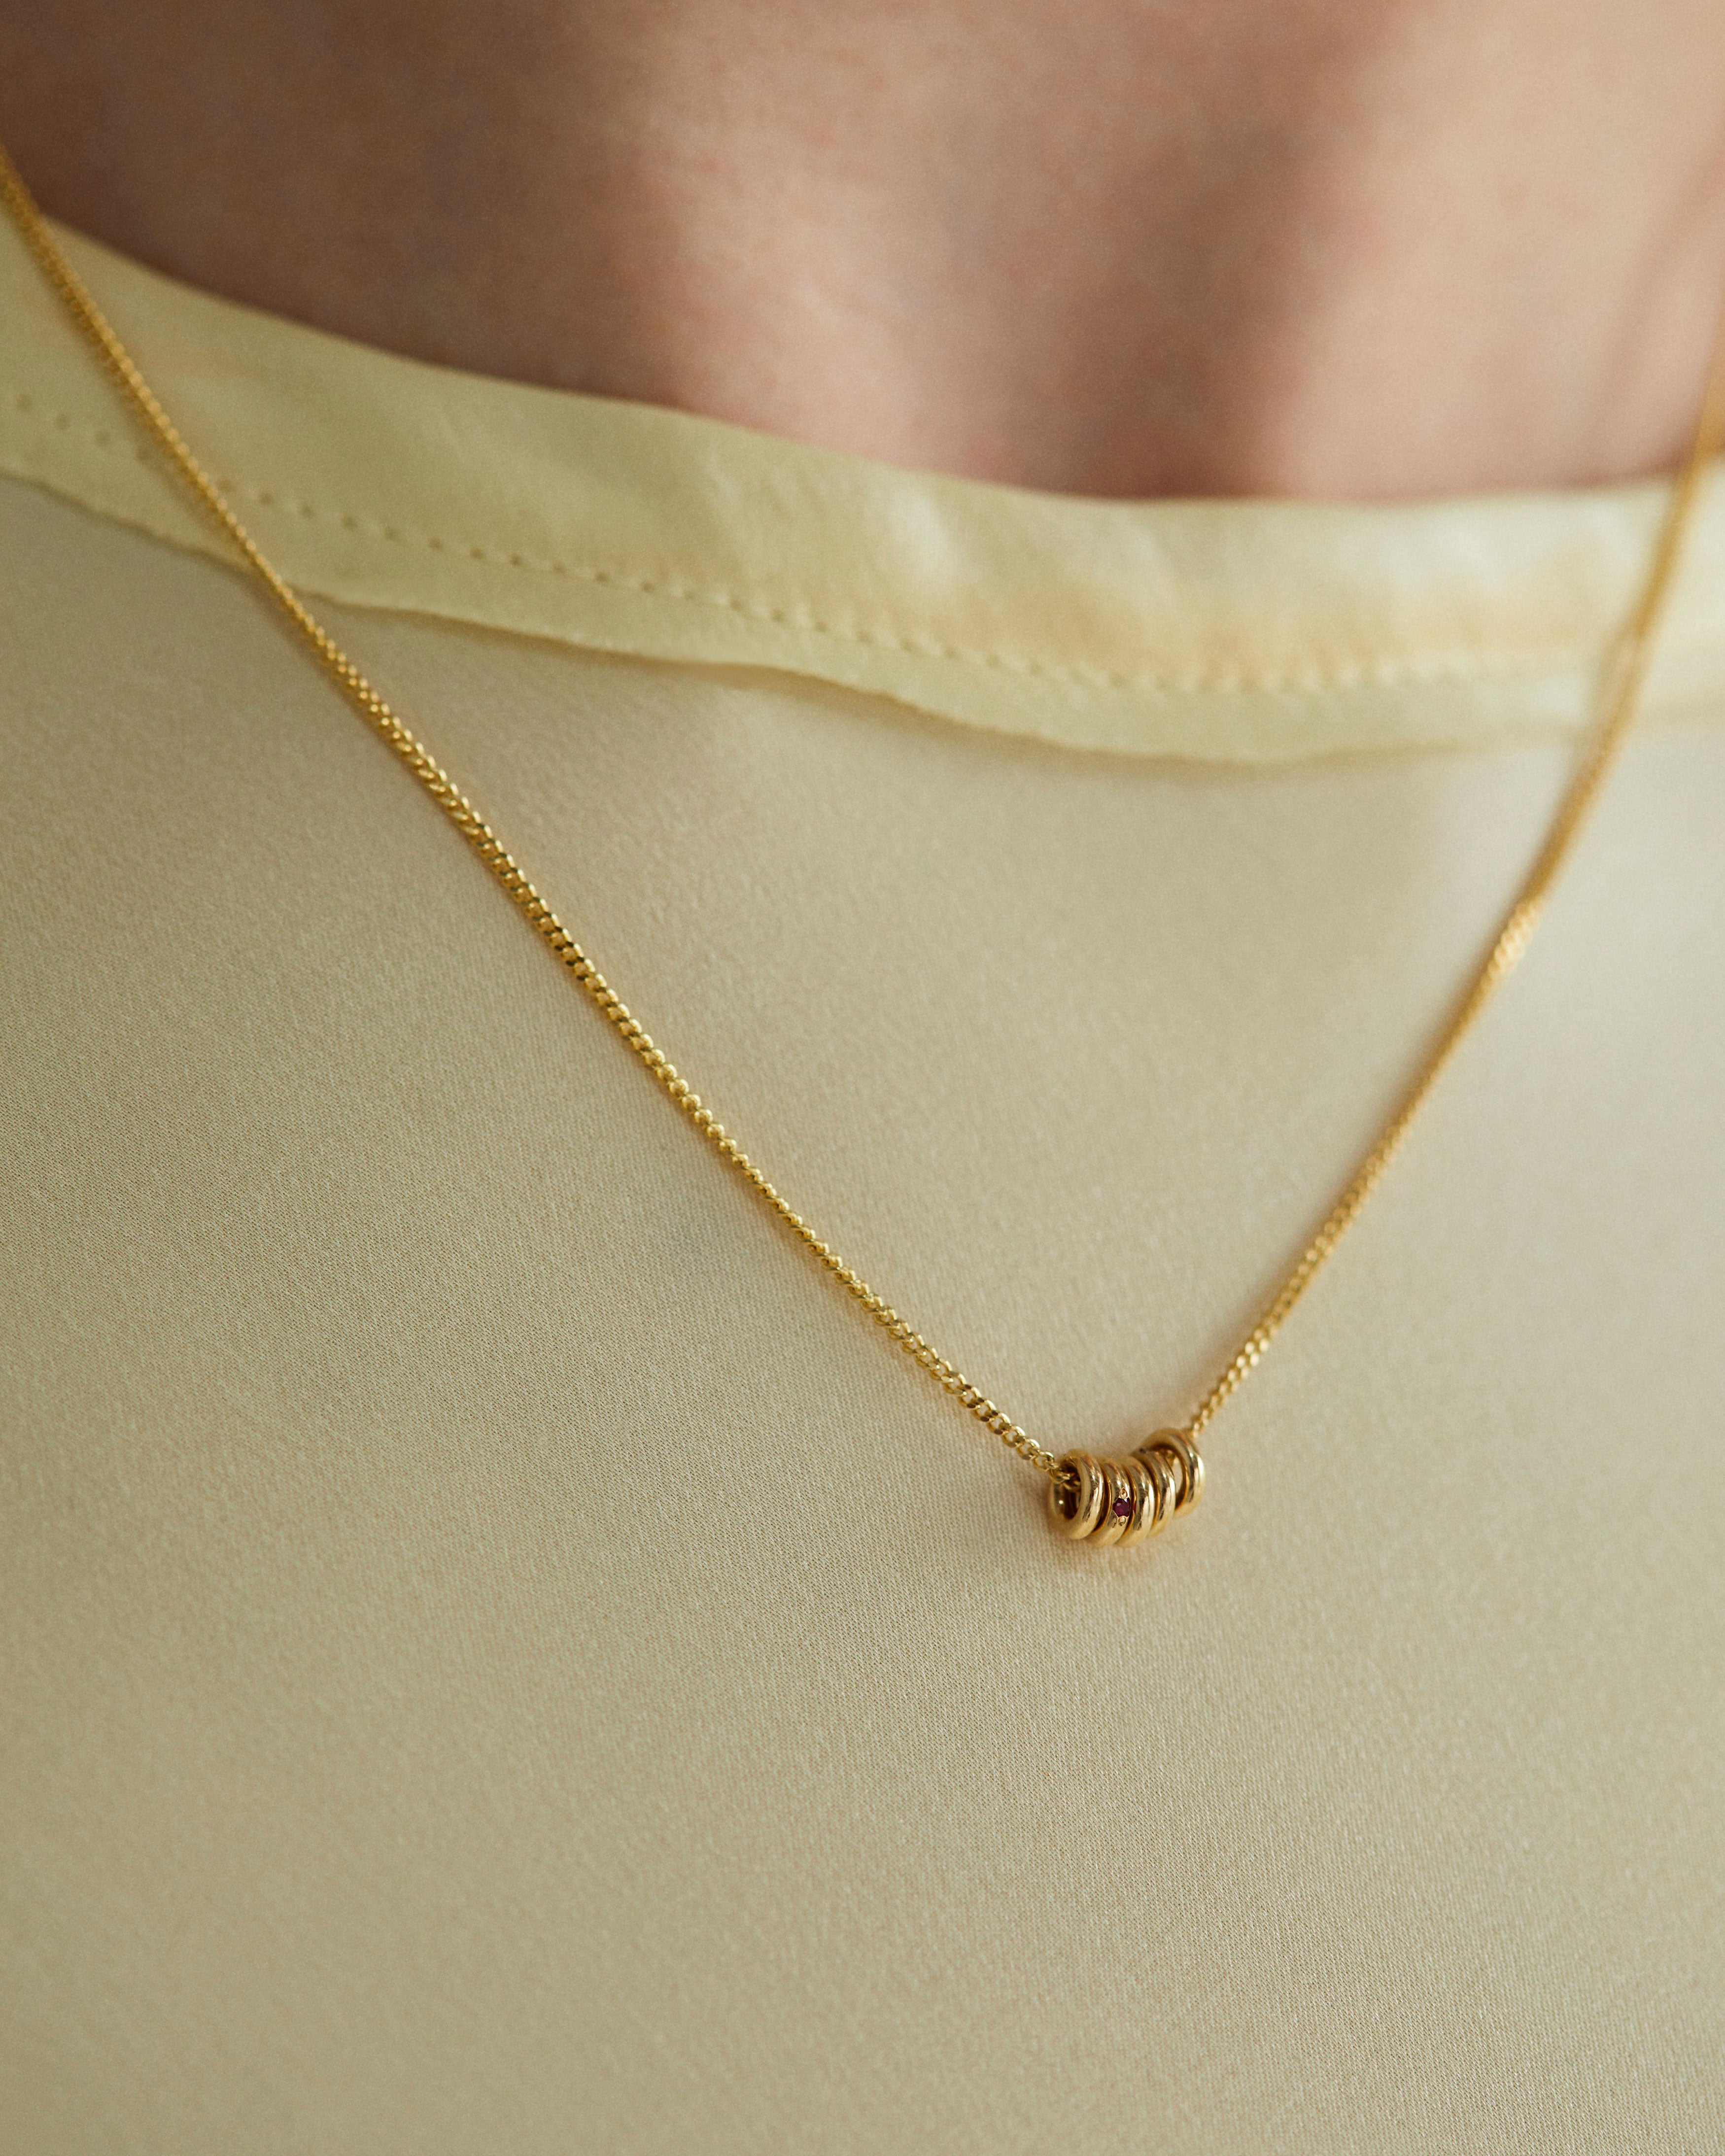 Aether Necklace in Yellow Gold with multiple charms.